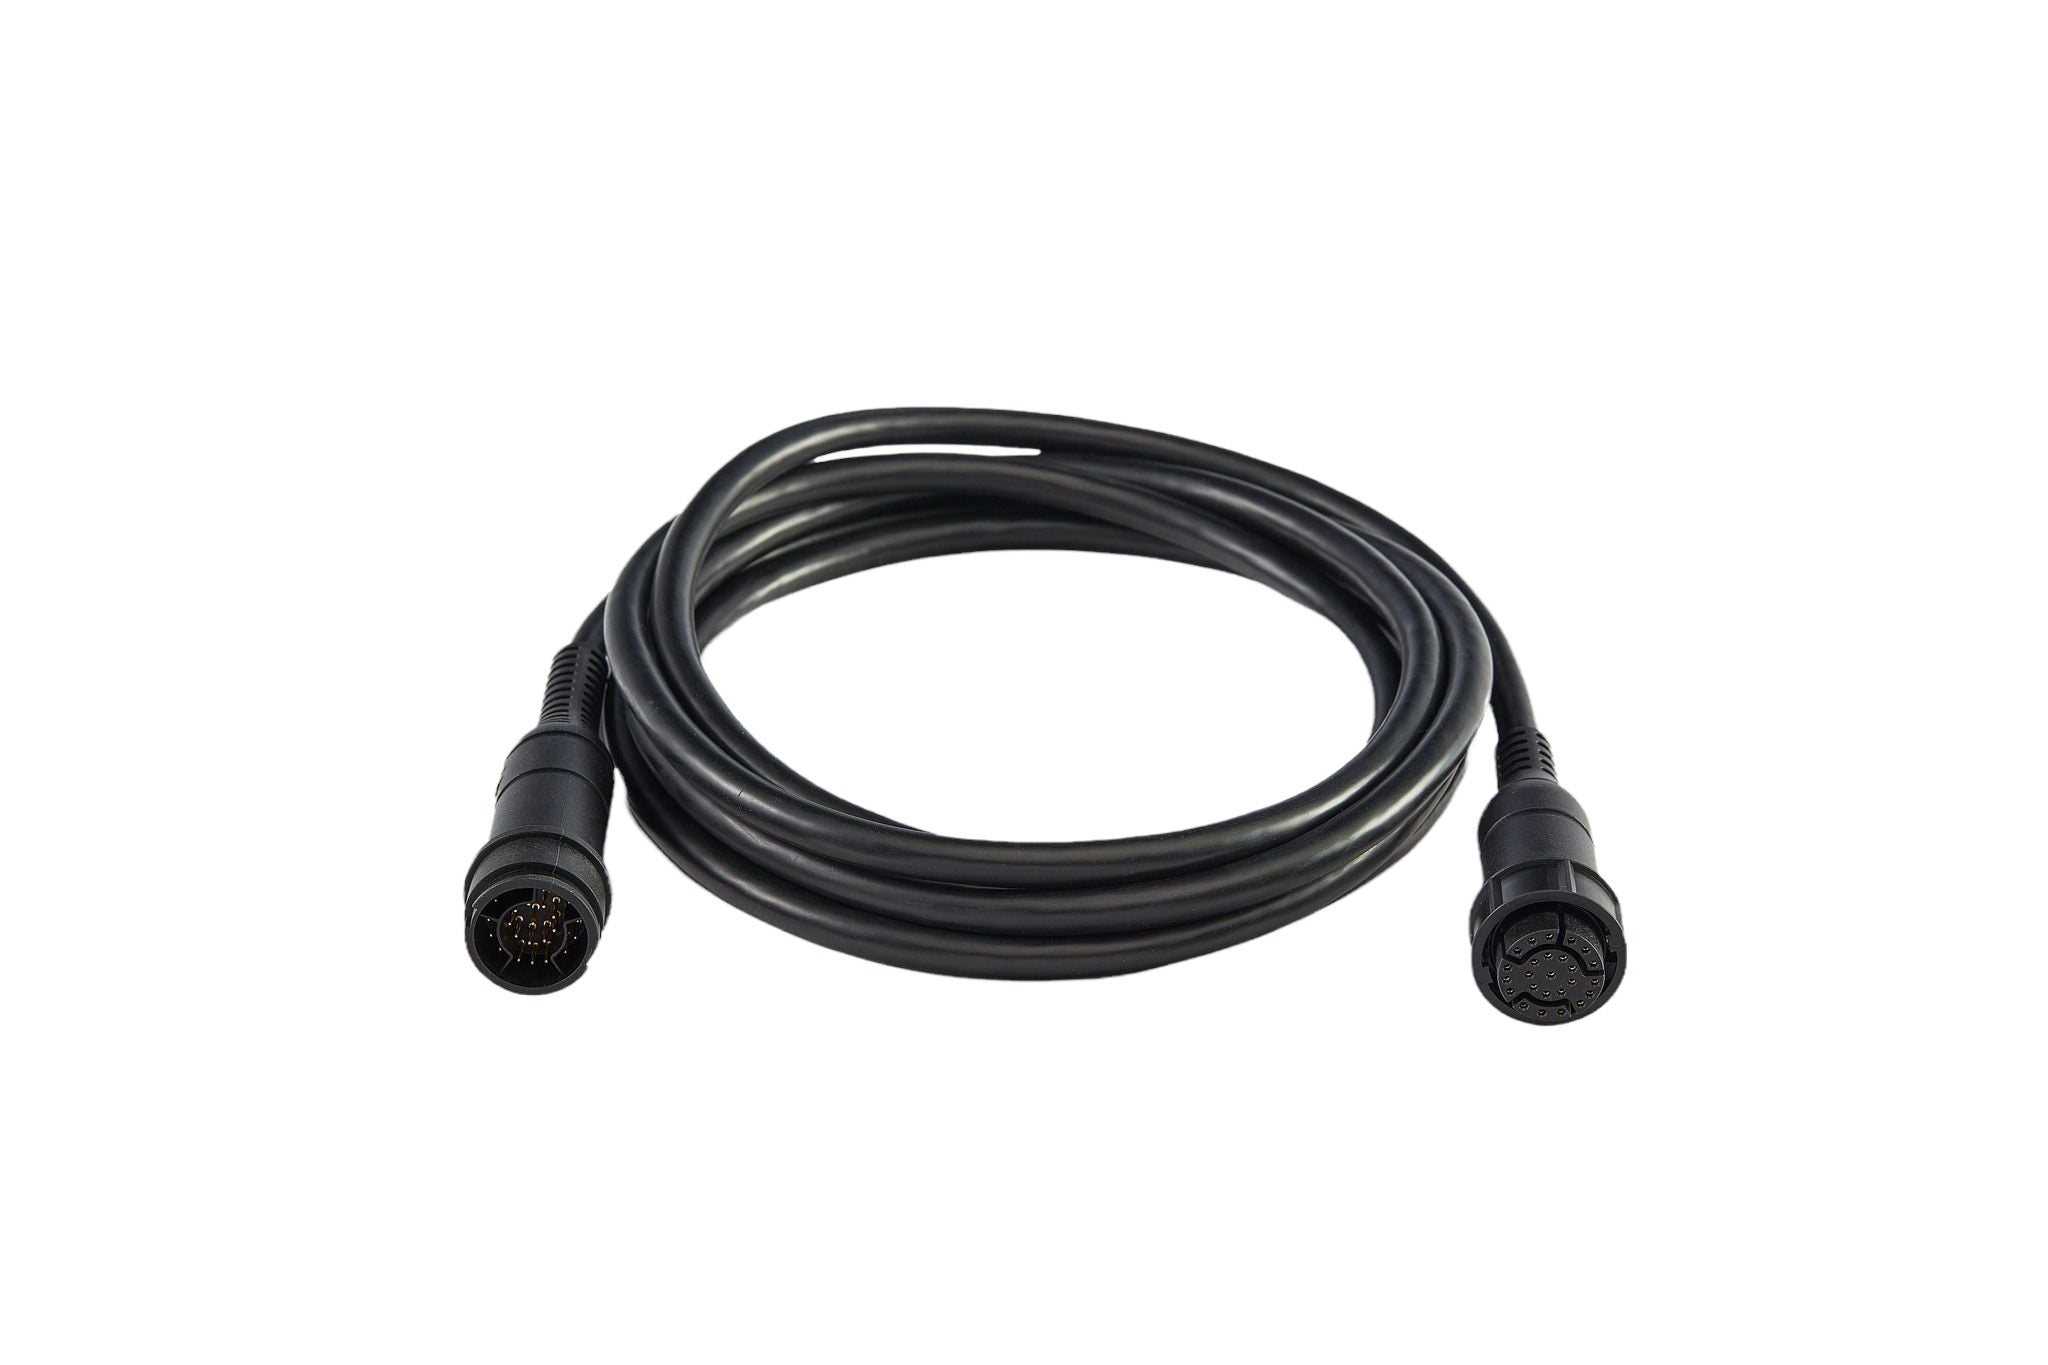 Raymarine 3m Extension Cable For RealVision 3D Transducers